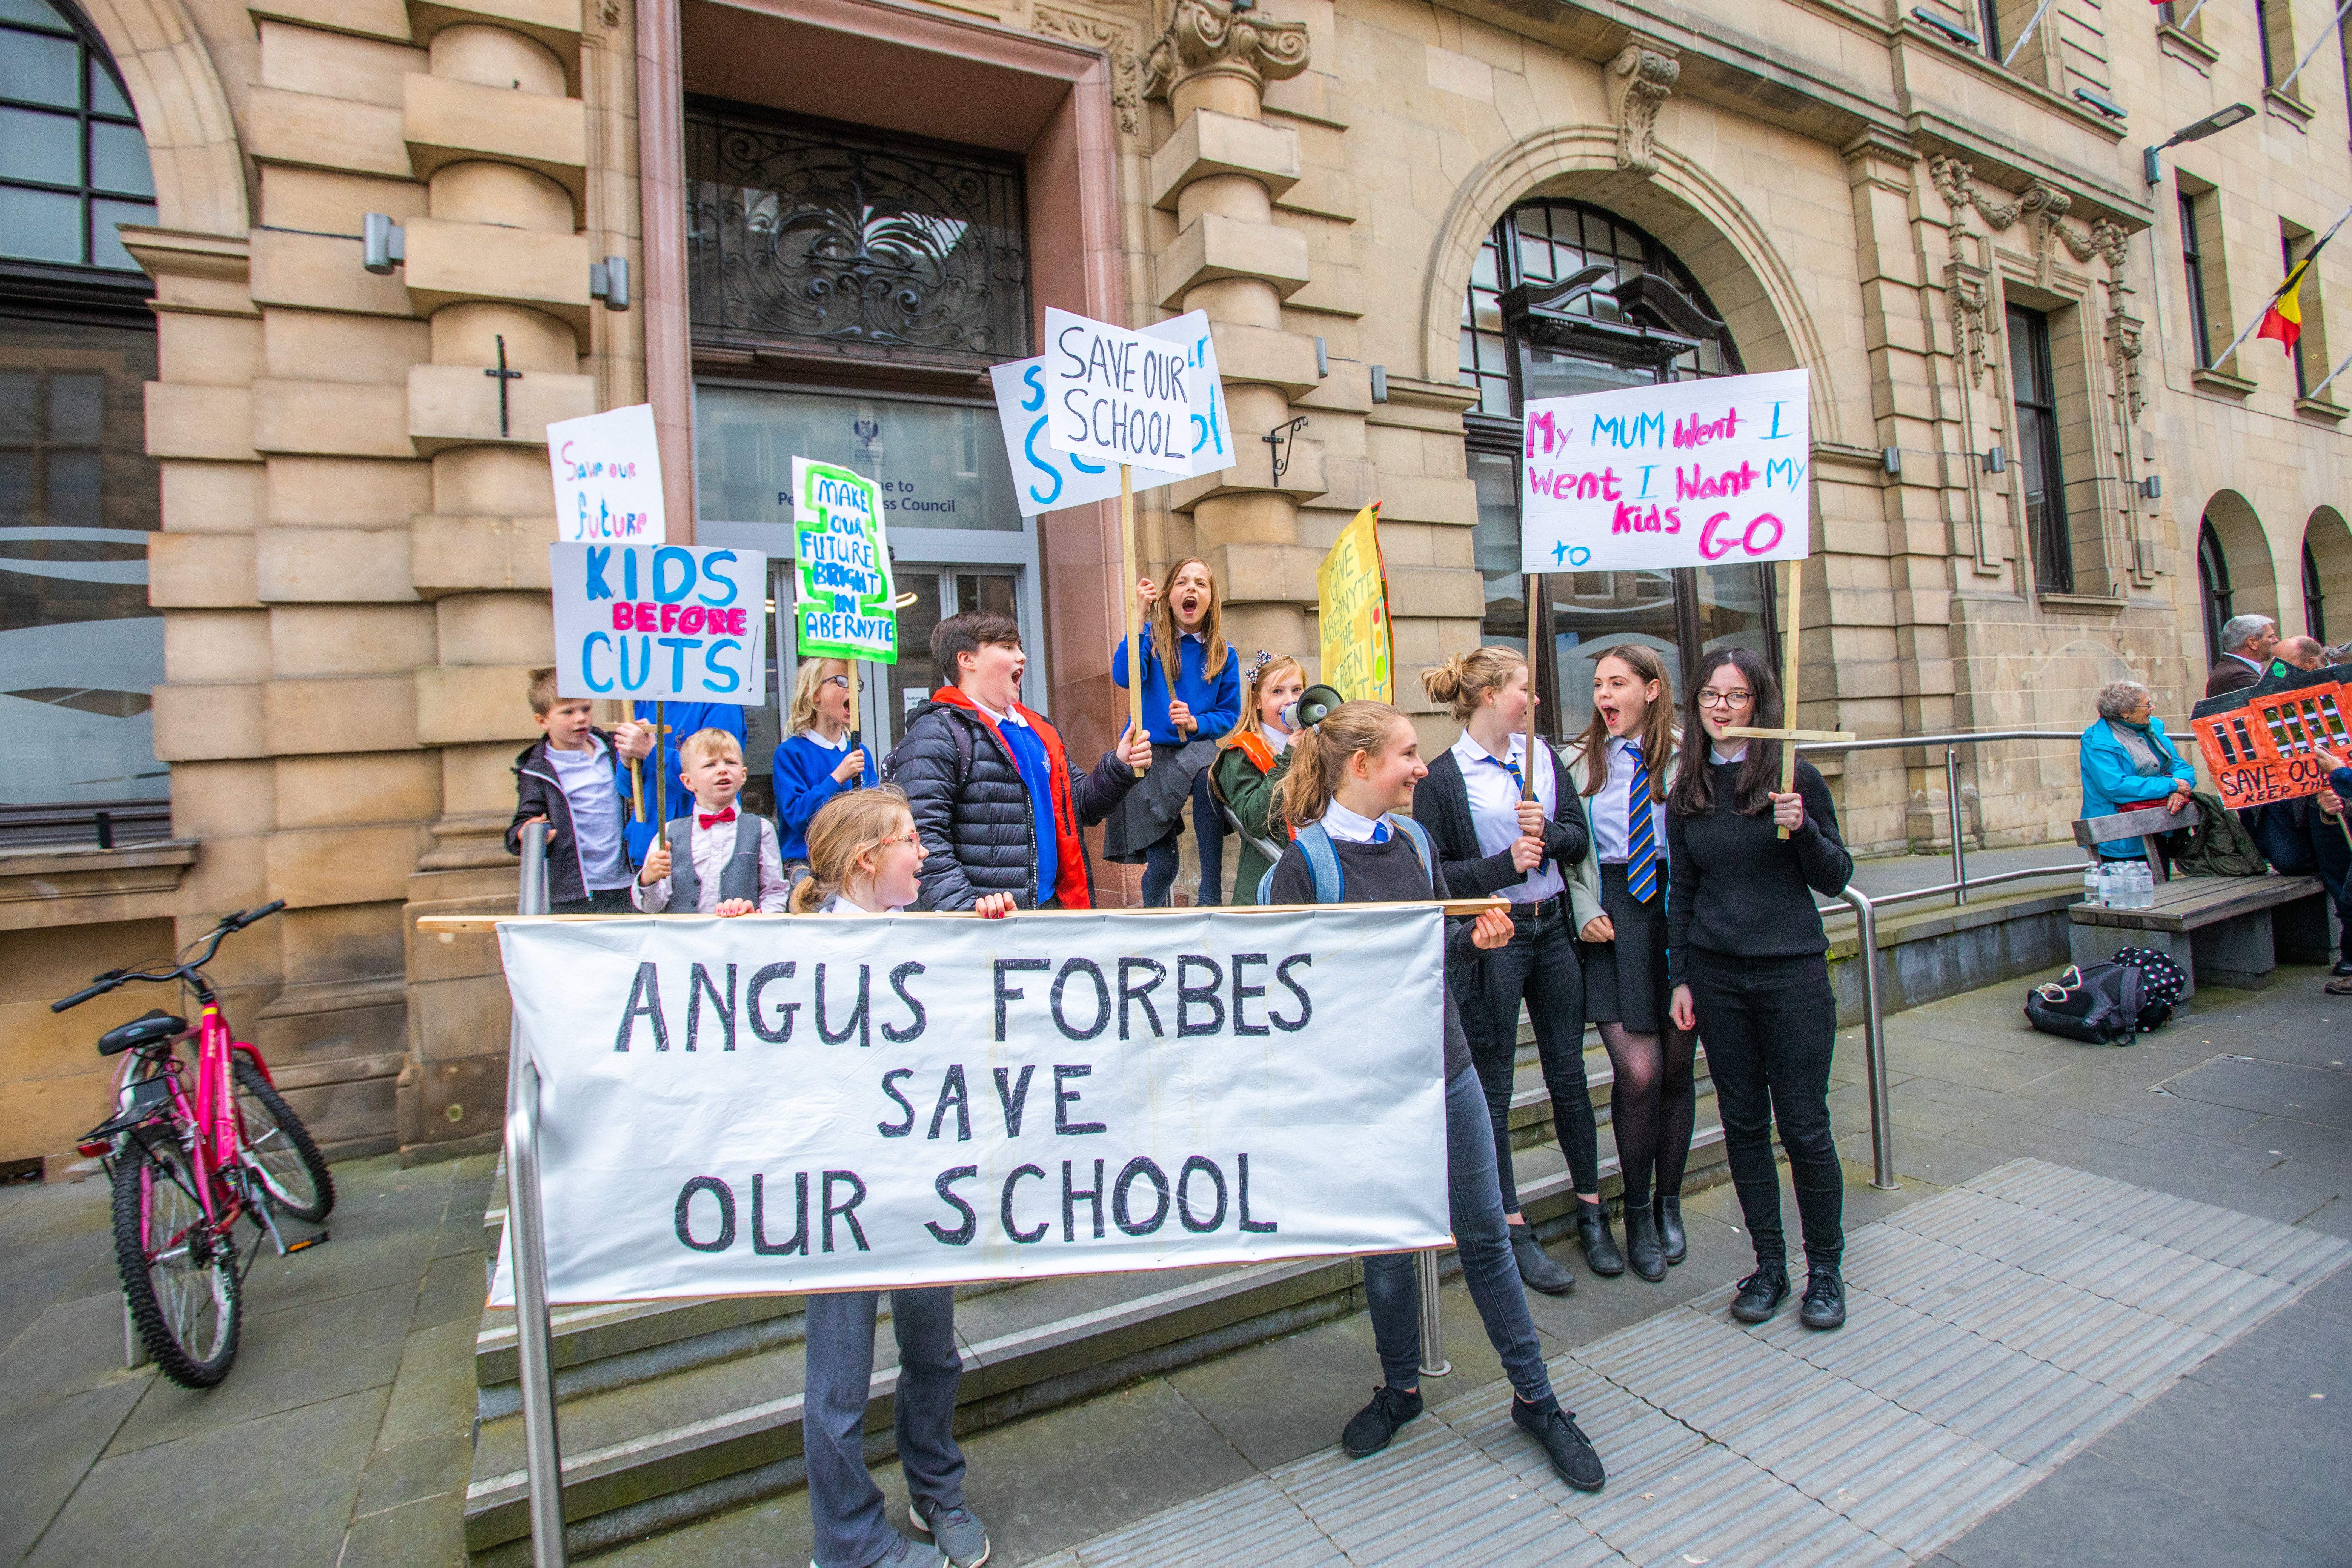 Children, parents and community representatives from Abernyte demonstrated outside Perth and Kinross Council HQ prior to council meeting on the potential closure of Abernyte Primary School.